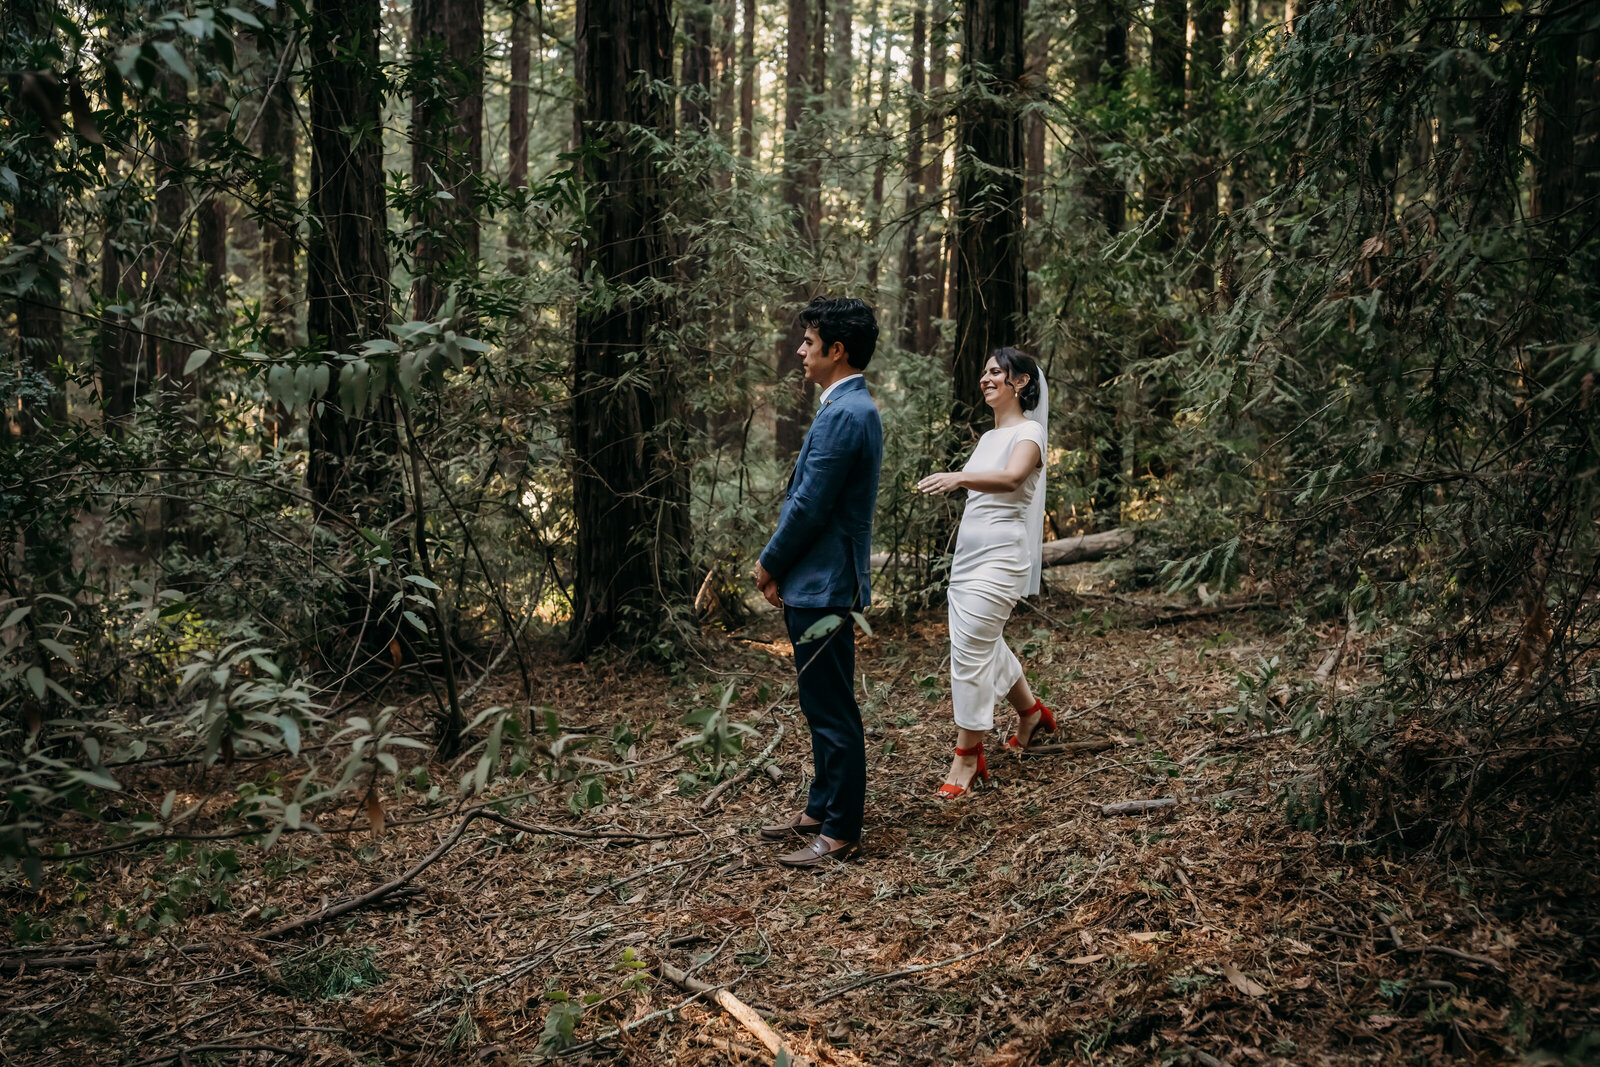 Outdoor forest wedding photoshoot in San Francisco  bay area